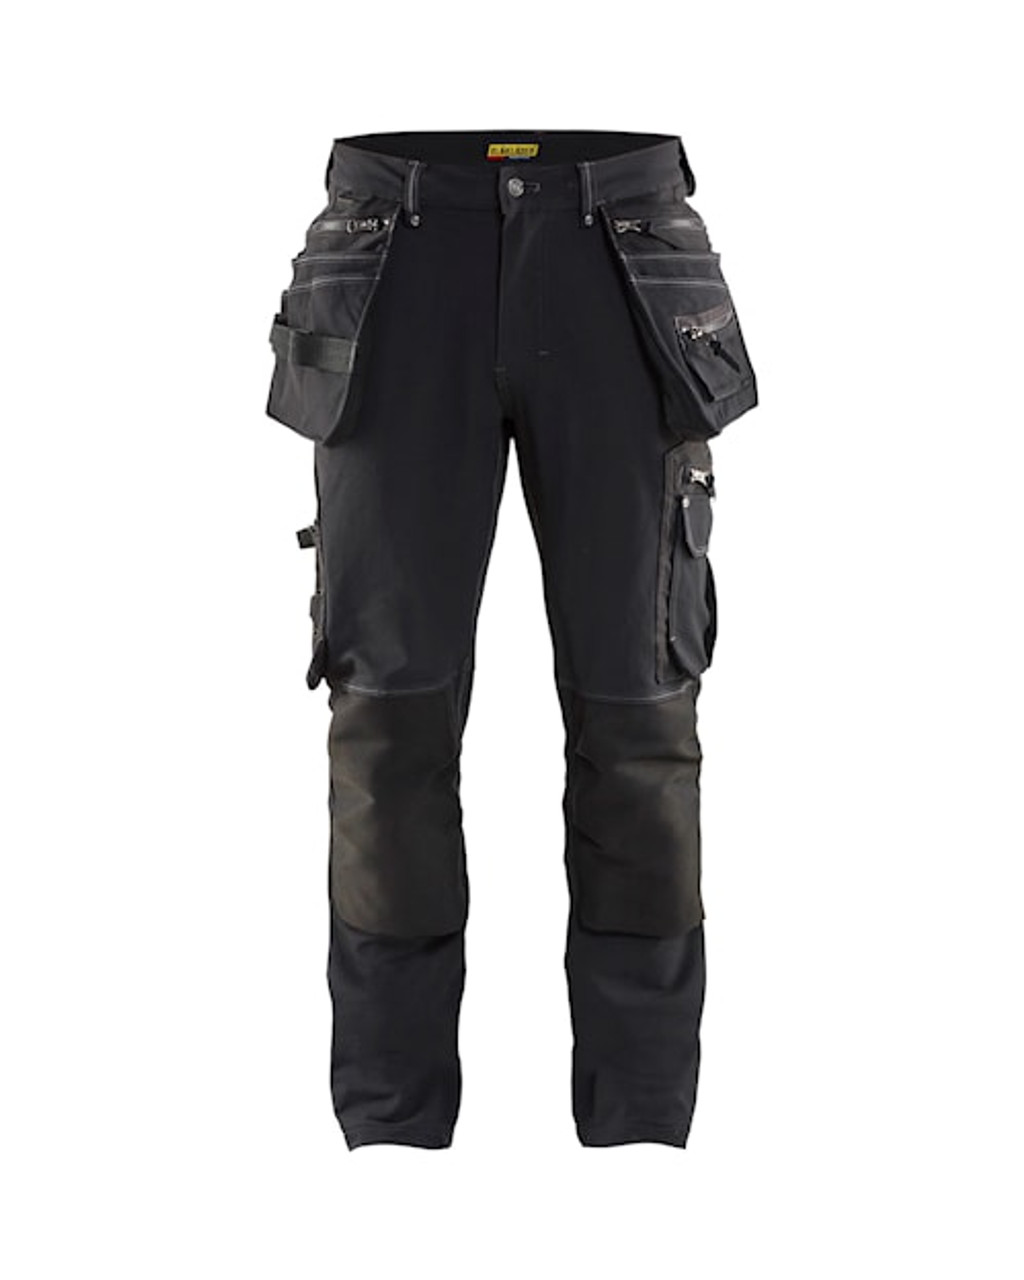 BLAKLADER  Trousers | Craftsman Hardware supplies Construction Industry, 4-Way Stretch Work Trousers with Holster Pockets for Carpenters, Steelfixers and Electricians